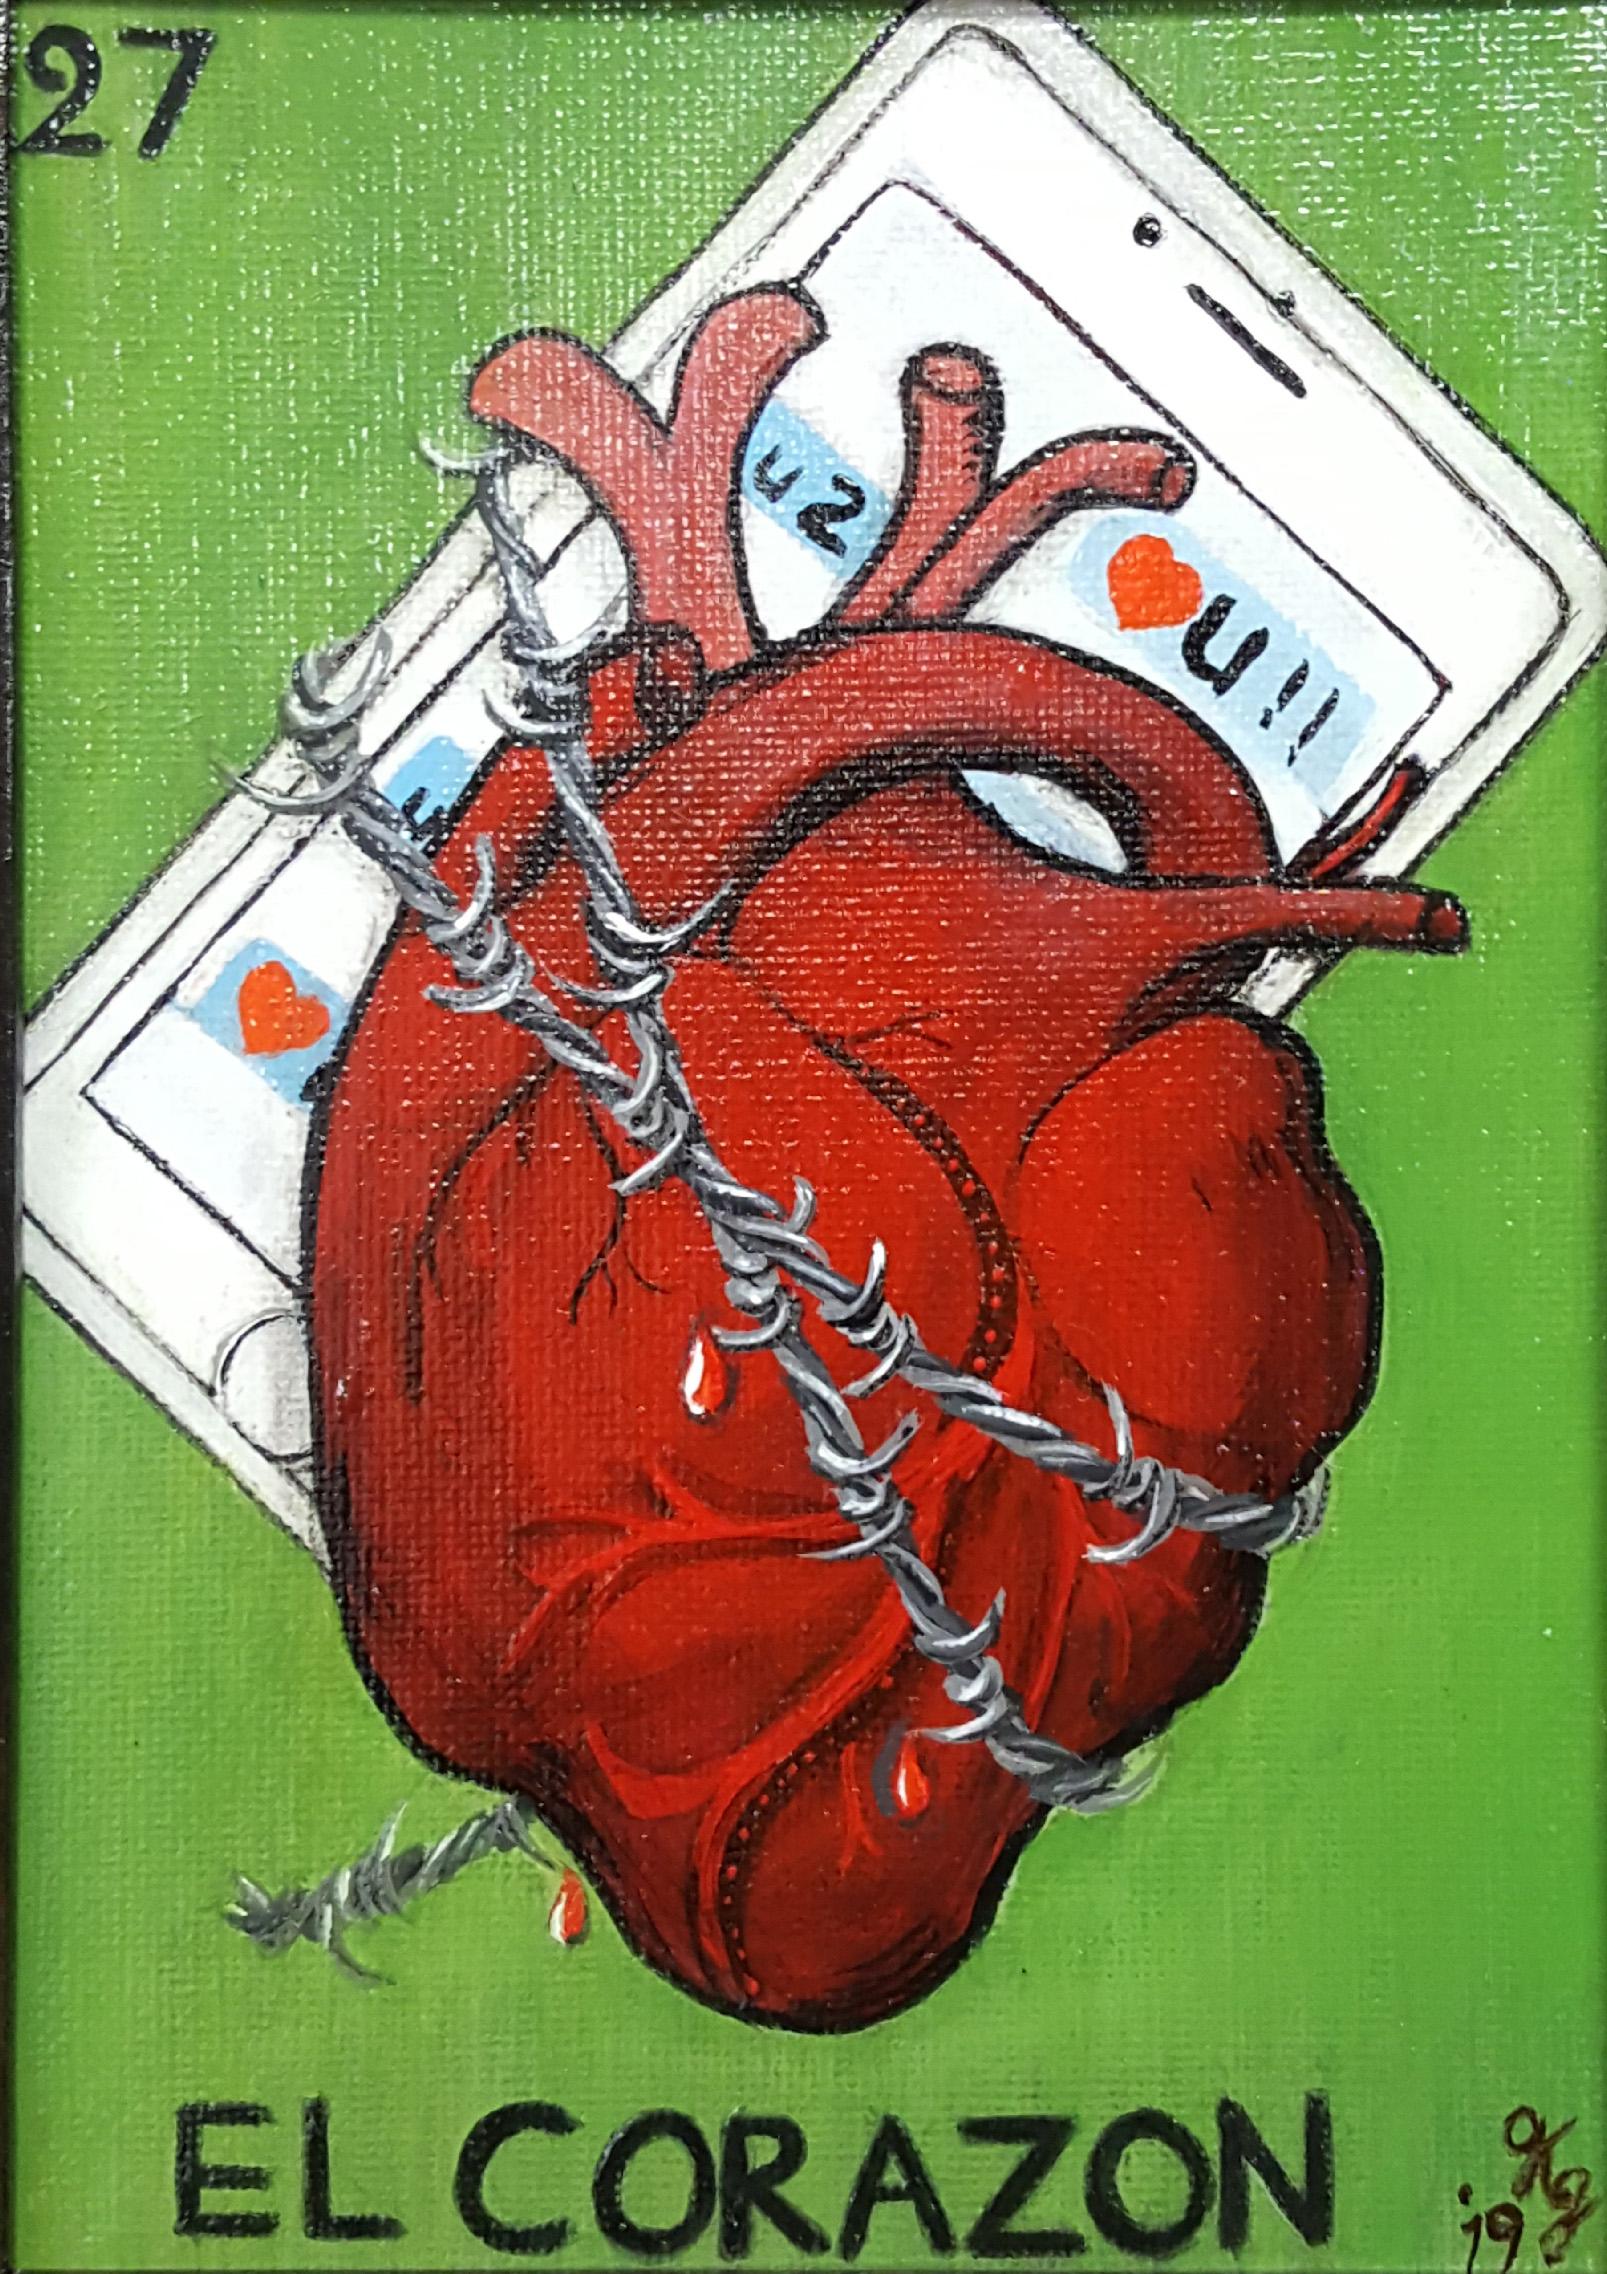 El Corazon The Heart
chained to a cellphone
Comes Framed 
the painting is 7x5

About the Artist: Georgia Griffin is a self-taught artist working primarily in acrylic and oil. She also enjoys exploring clay, resin and assemblage works, writing and